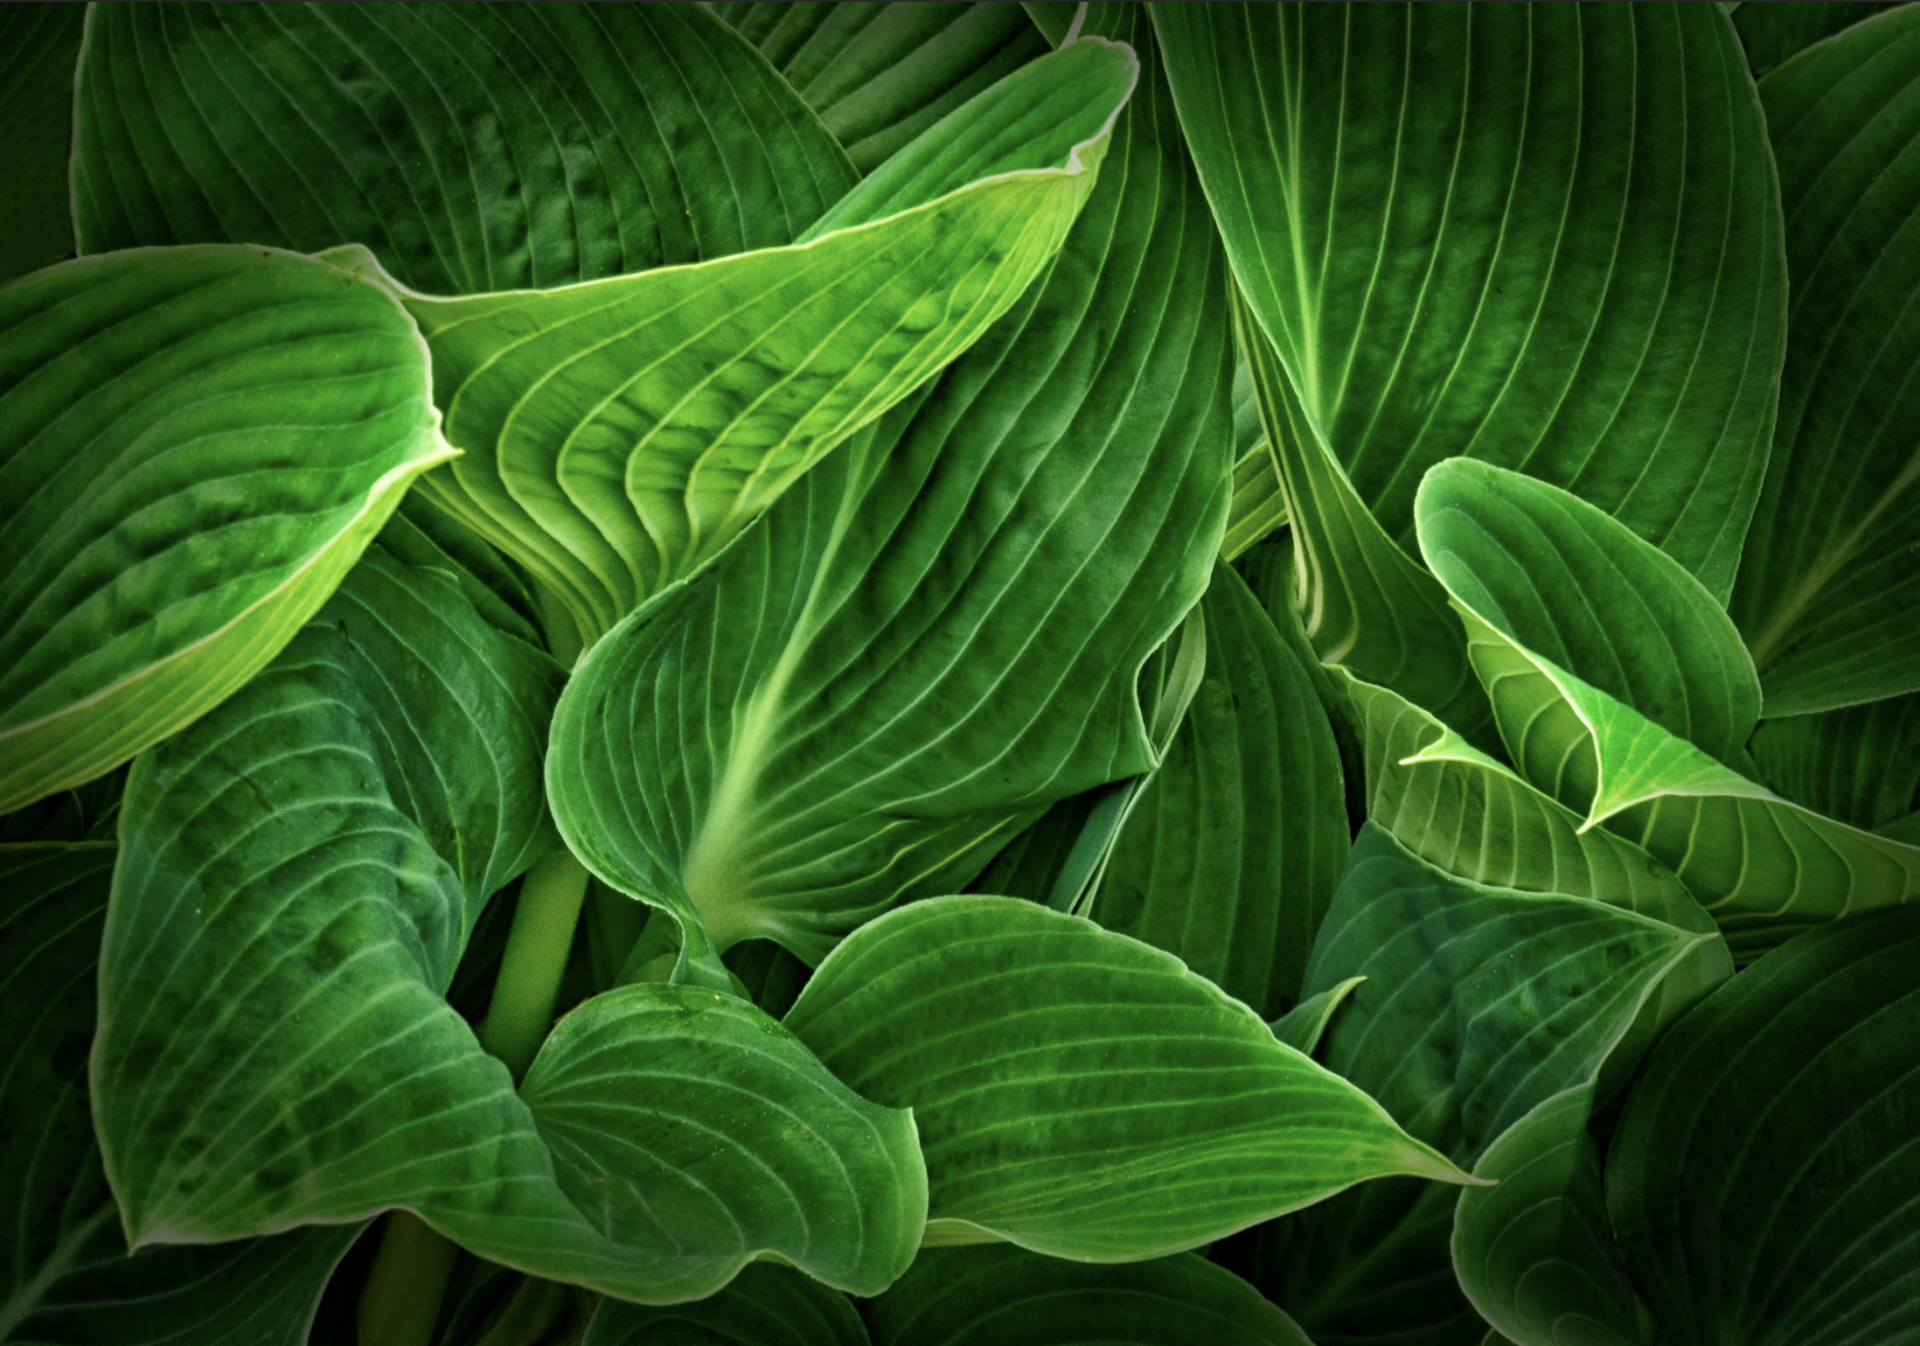 Close up photo of Hosta leaves.